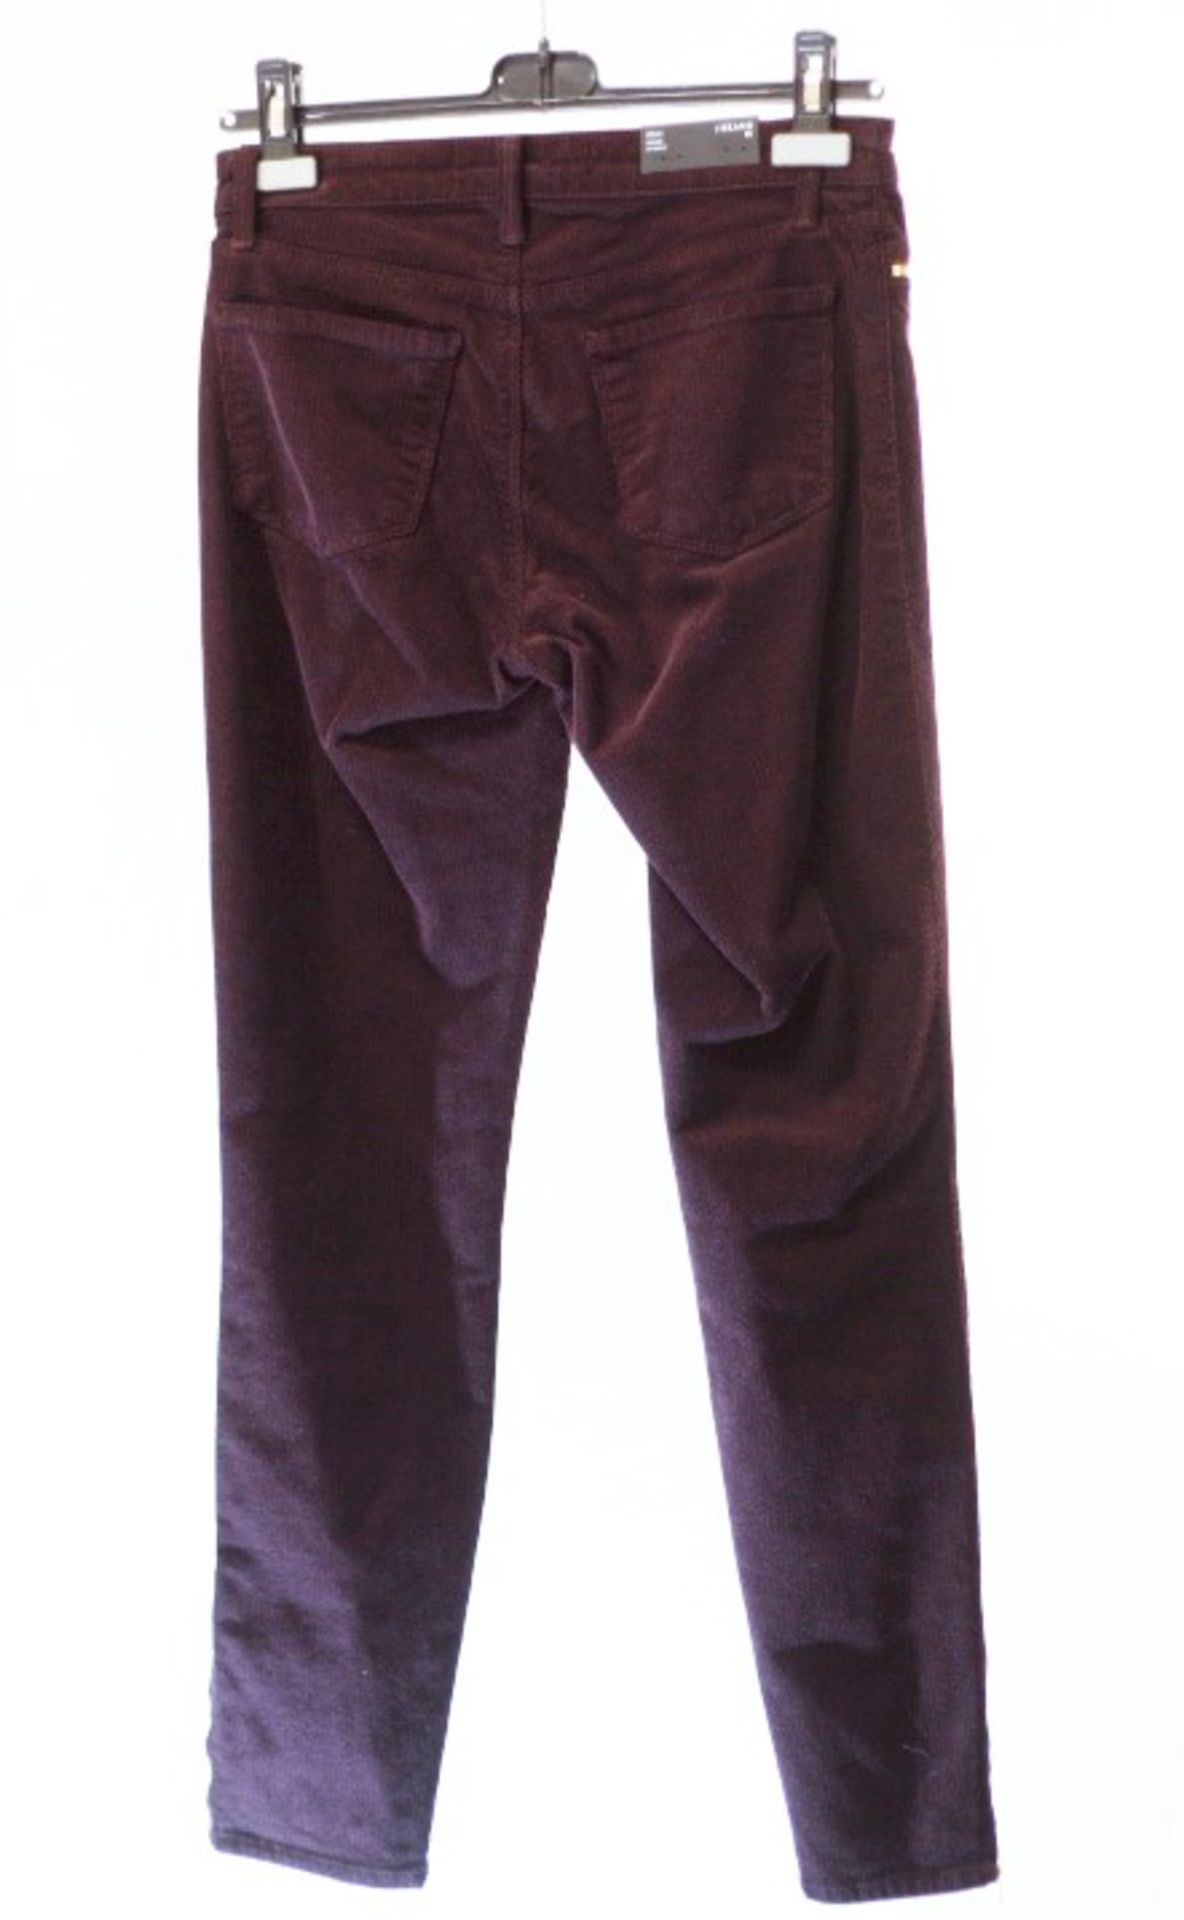 1 x J Brand Blackberry Corduroy Jeans - Size: 6 to 8 - Material: 56% Cotton, 37% Modal, 6% - Image 2 of 6